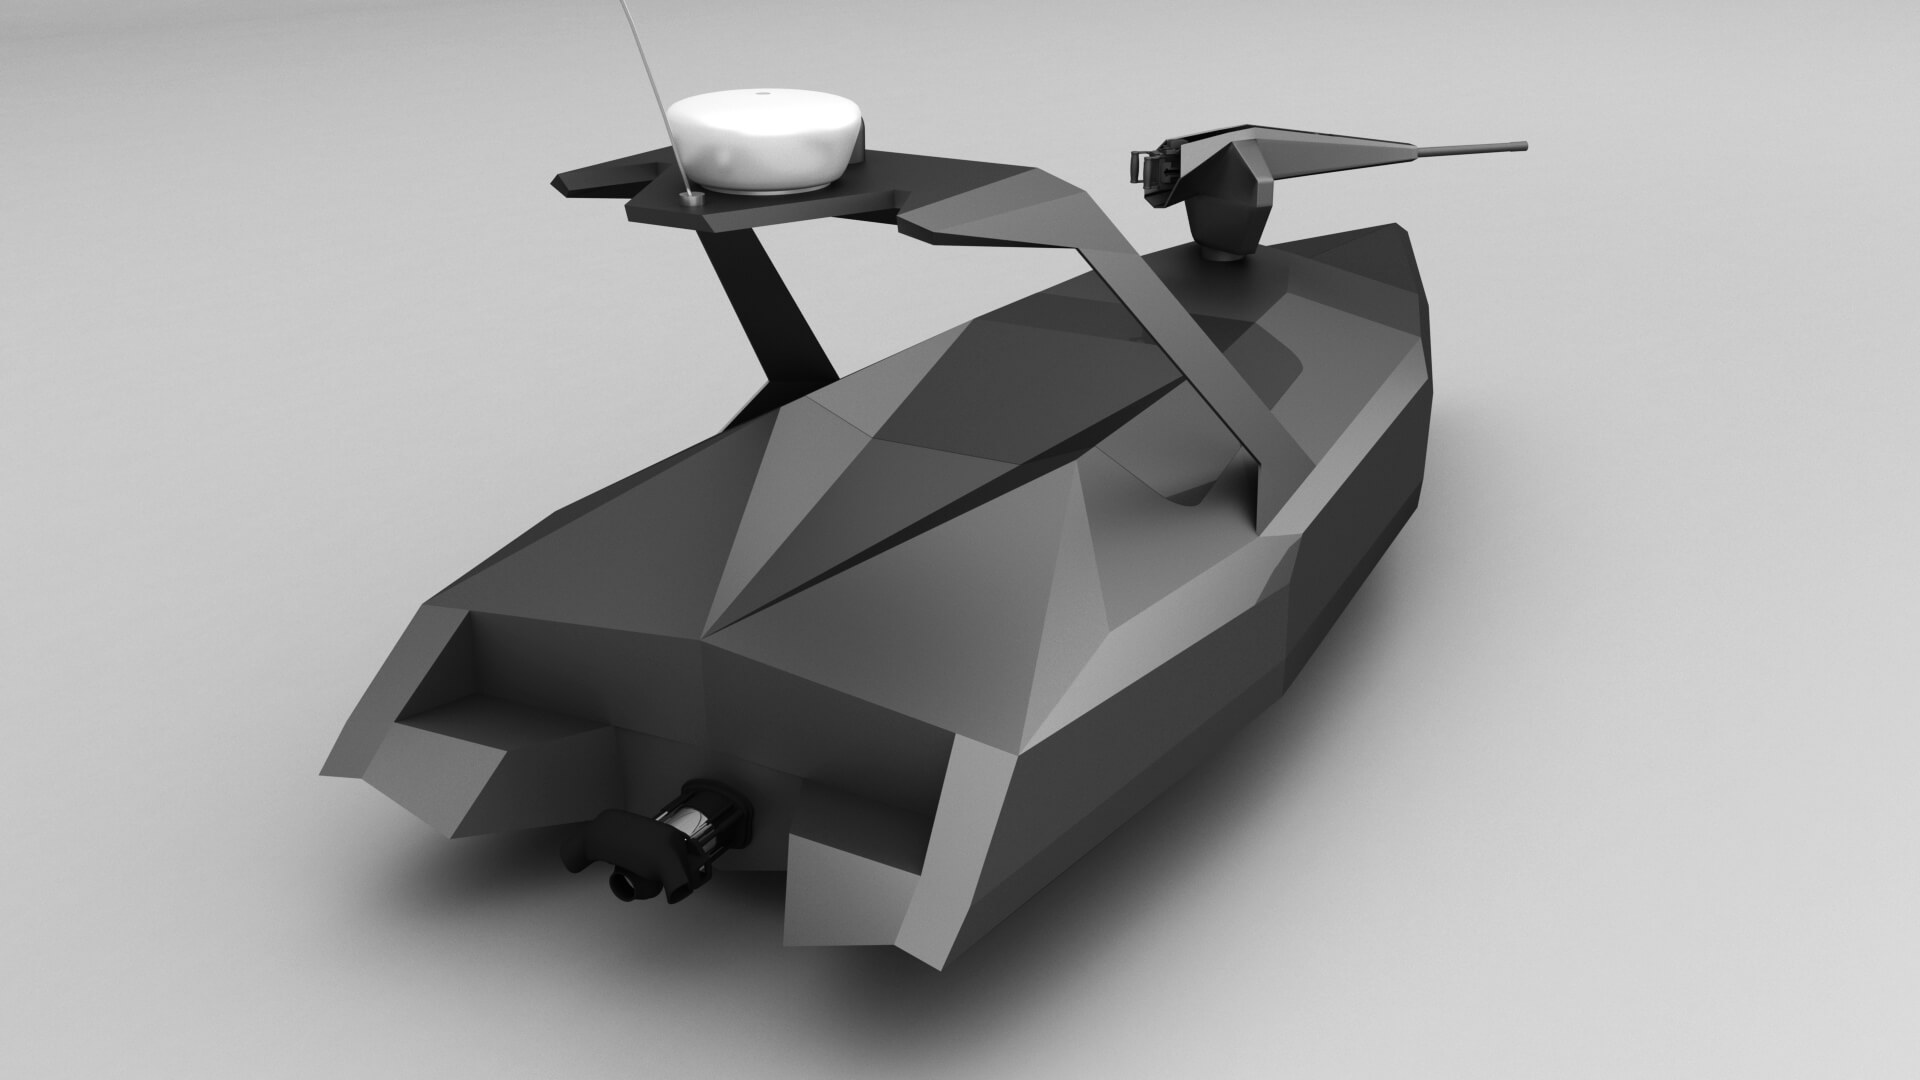 Stealth Drone 2